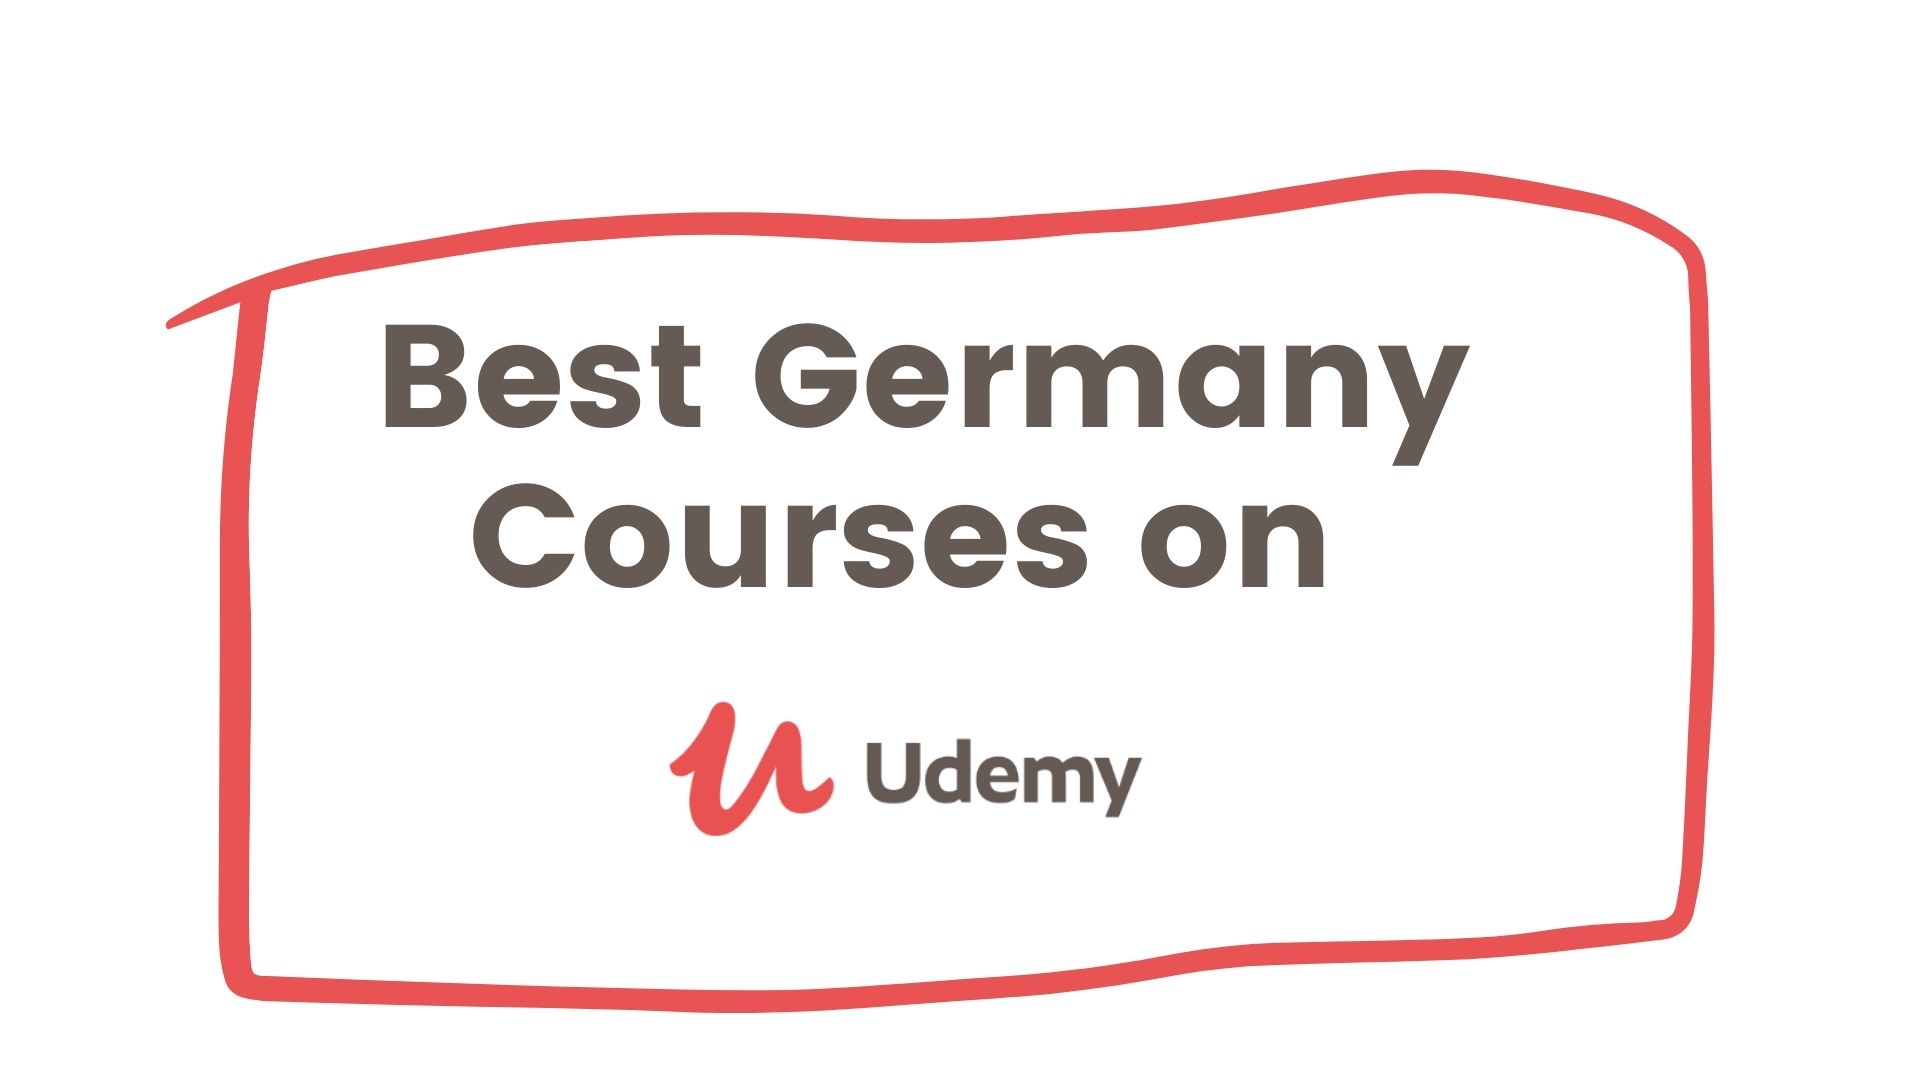 Top 17 Best Germany Courses on Udemy